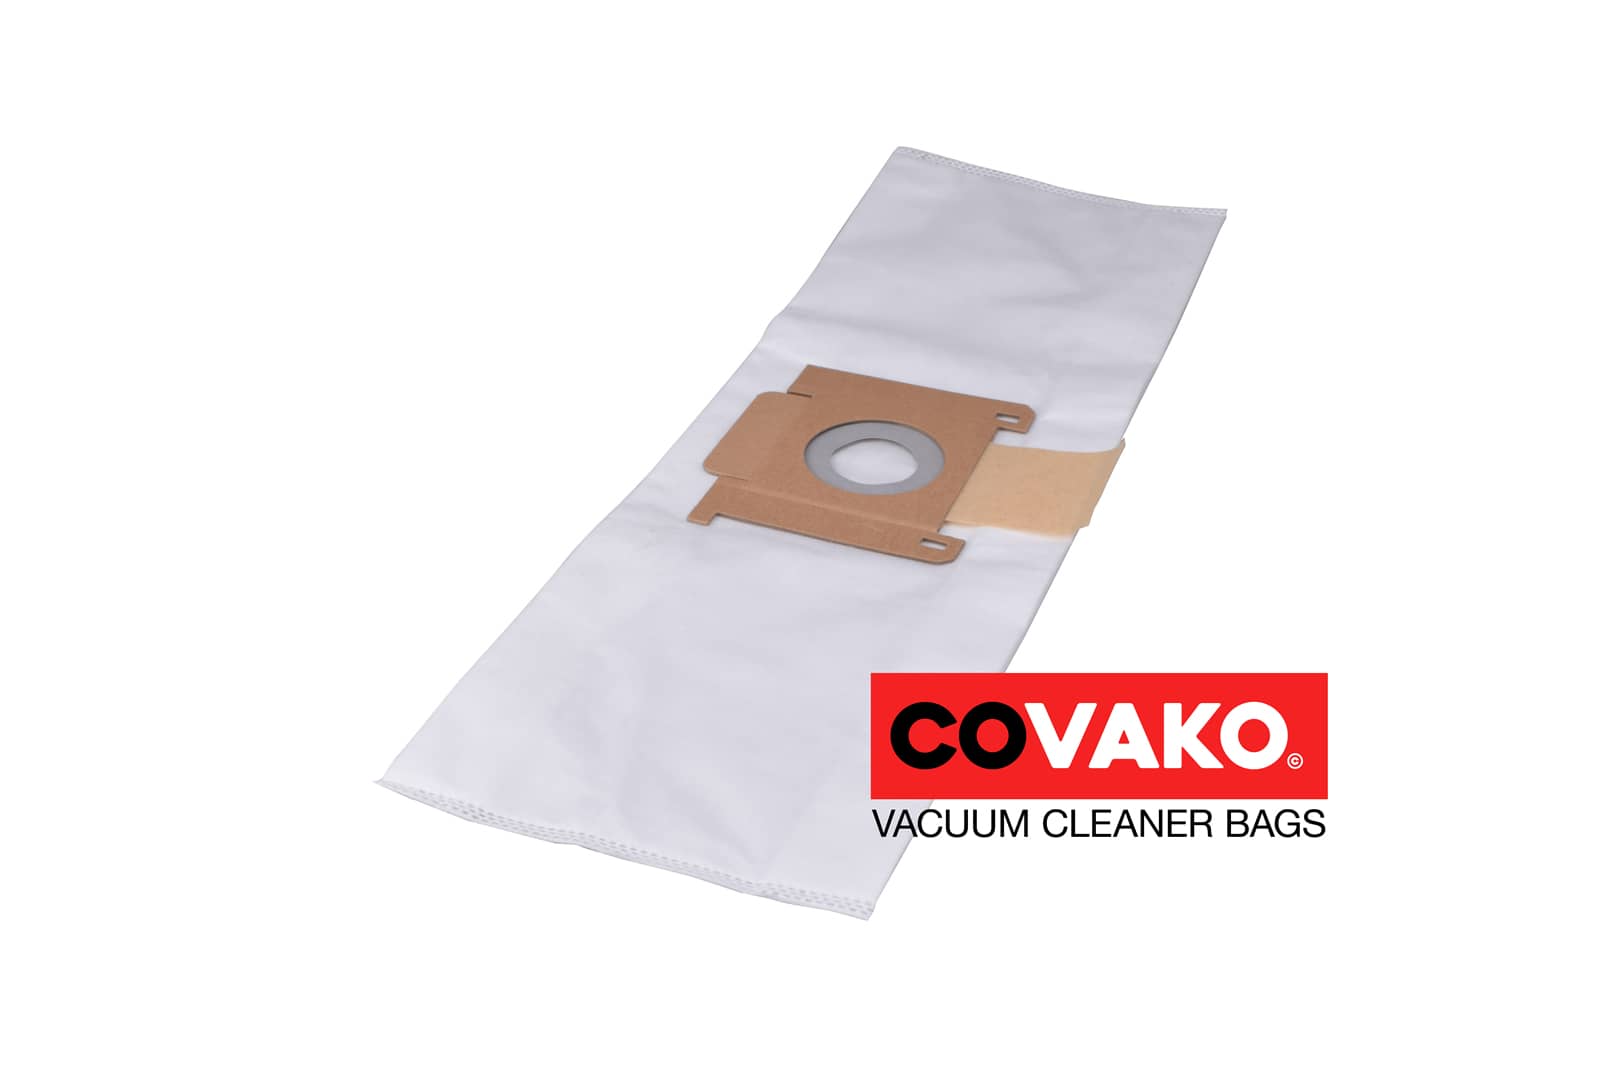 Oehme Otto i-vac C6 / Synthesis - Oehme Otto vacuum cleaner bags